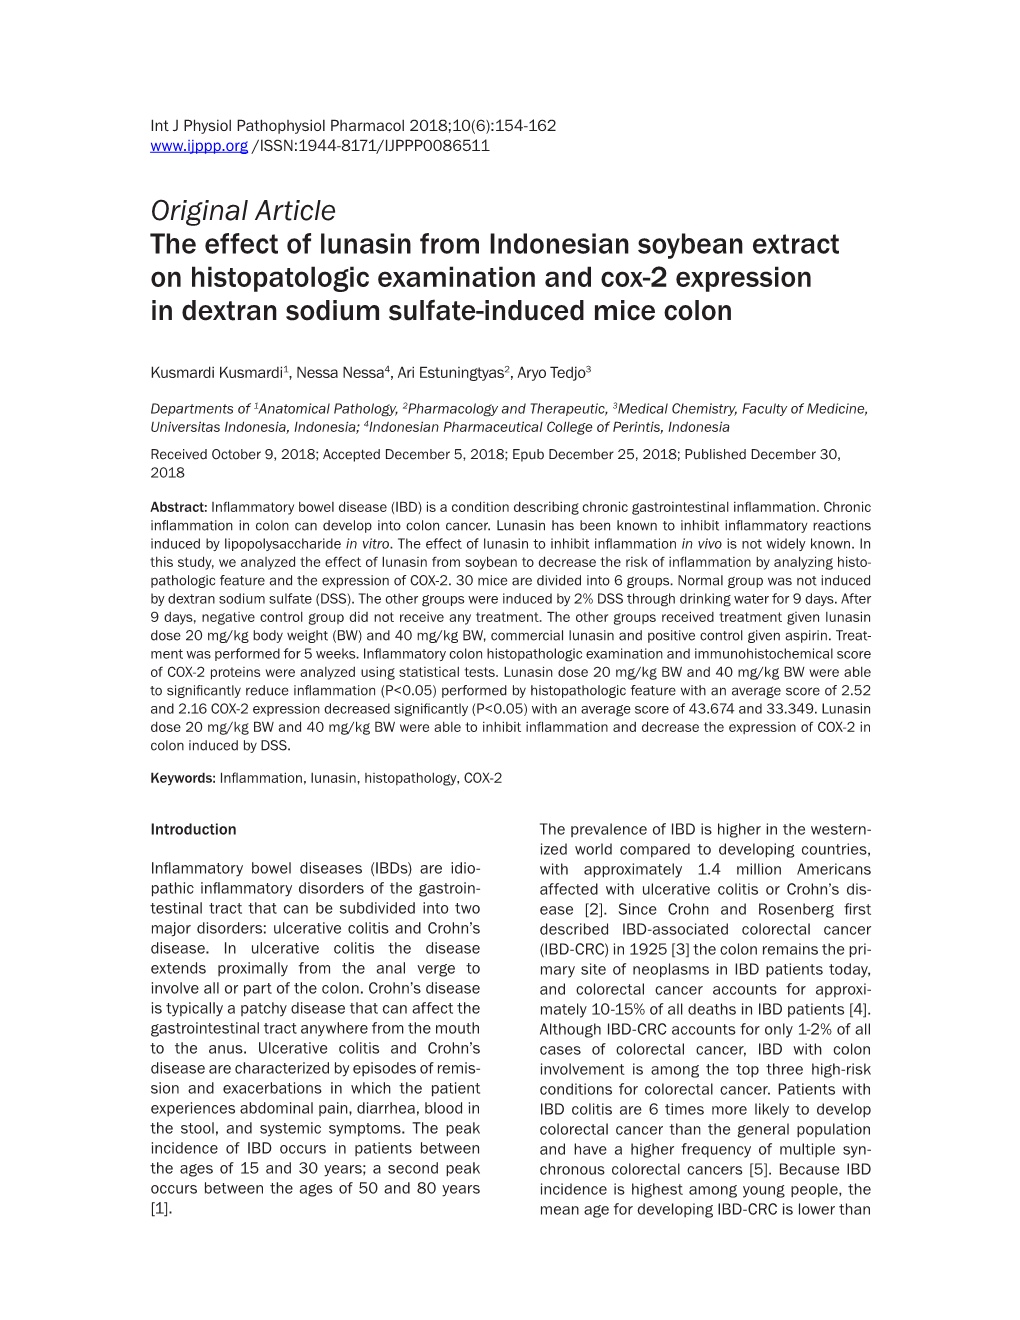 Original Article the Effect of Lunasin from Indonesian Soybean Extract on Histopatologic Examination and Cox-2 Expression in Dextran Sodium Sulfate-Induced Mice Colon